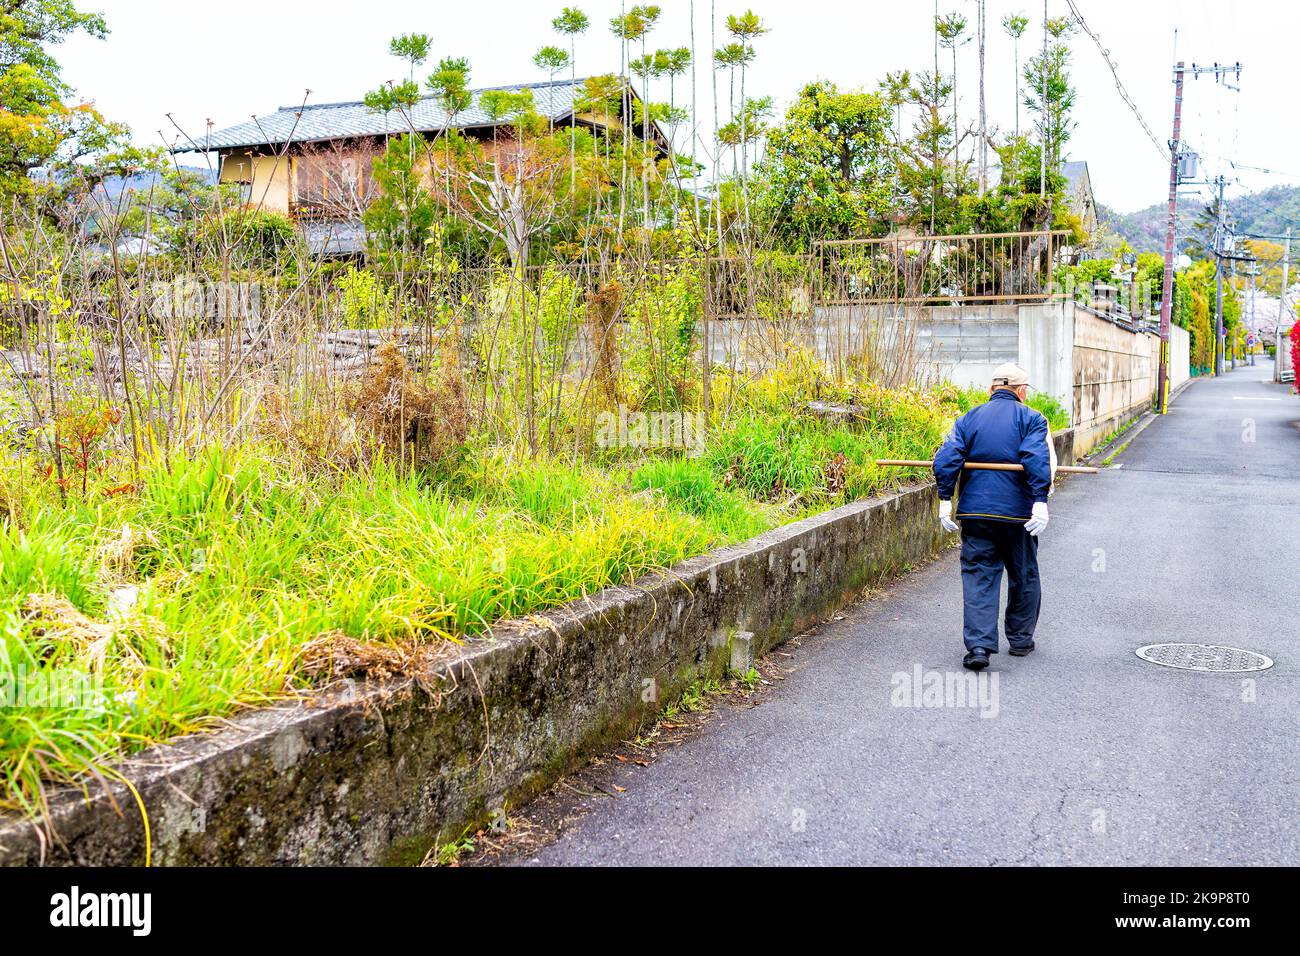 Kyoto, Japan - April 11, 2019: Senior elderly man walking with wooden stick behind back exercise in residential neighborhood with houses and garden Stock Photo